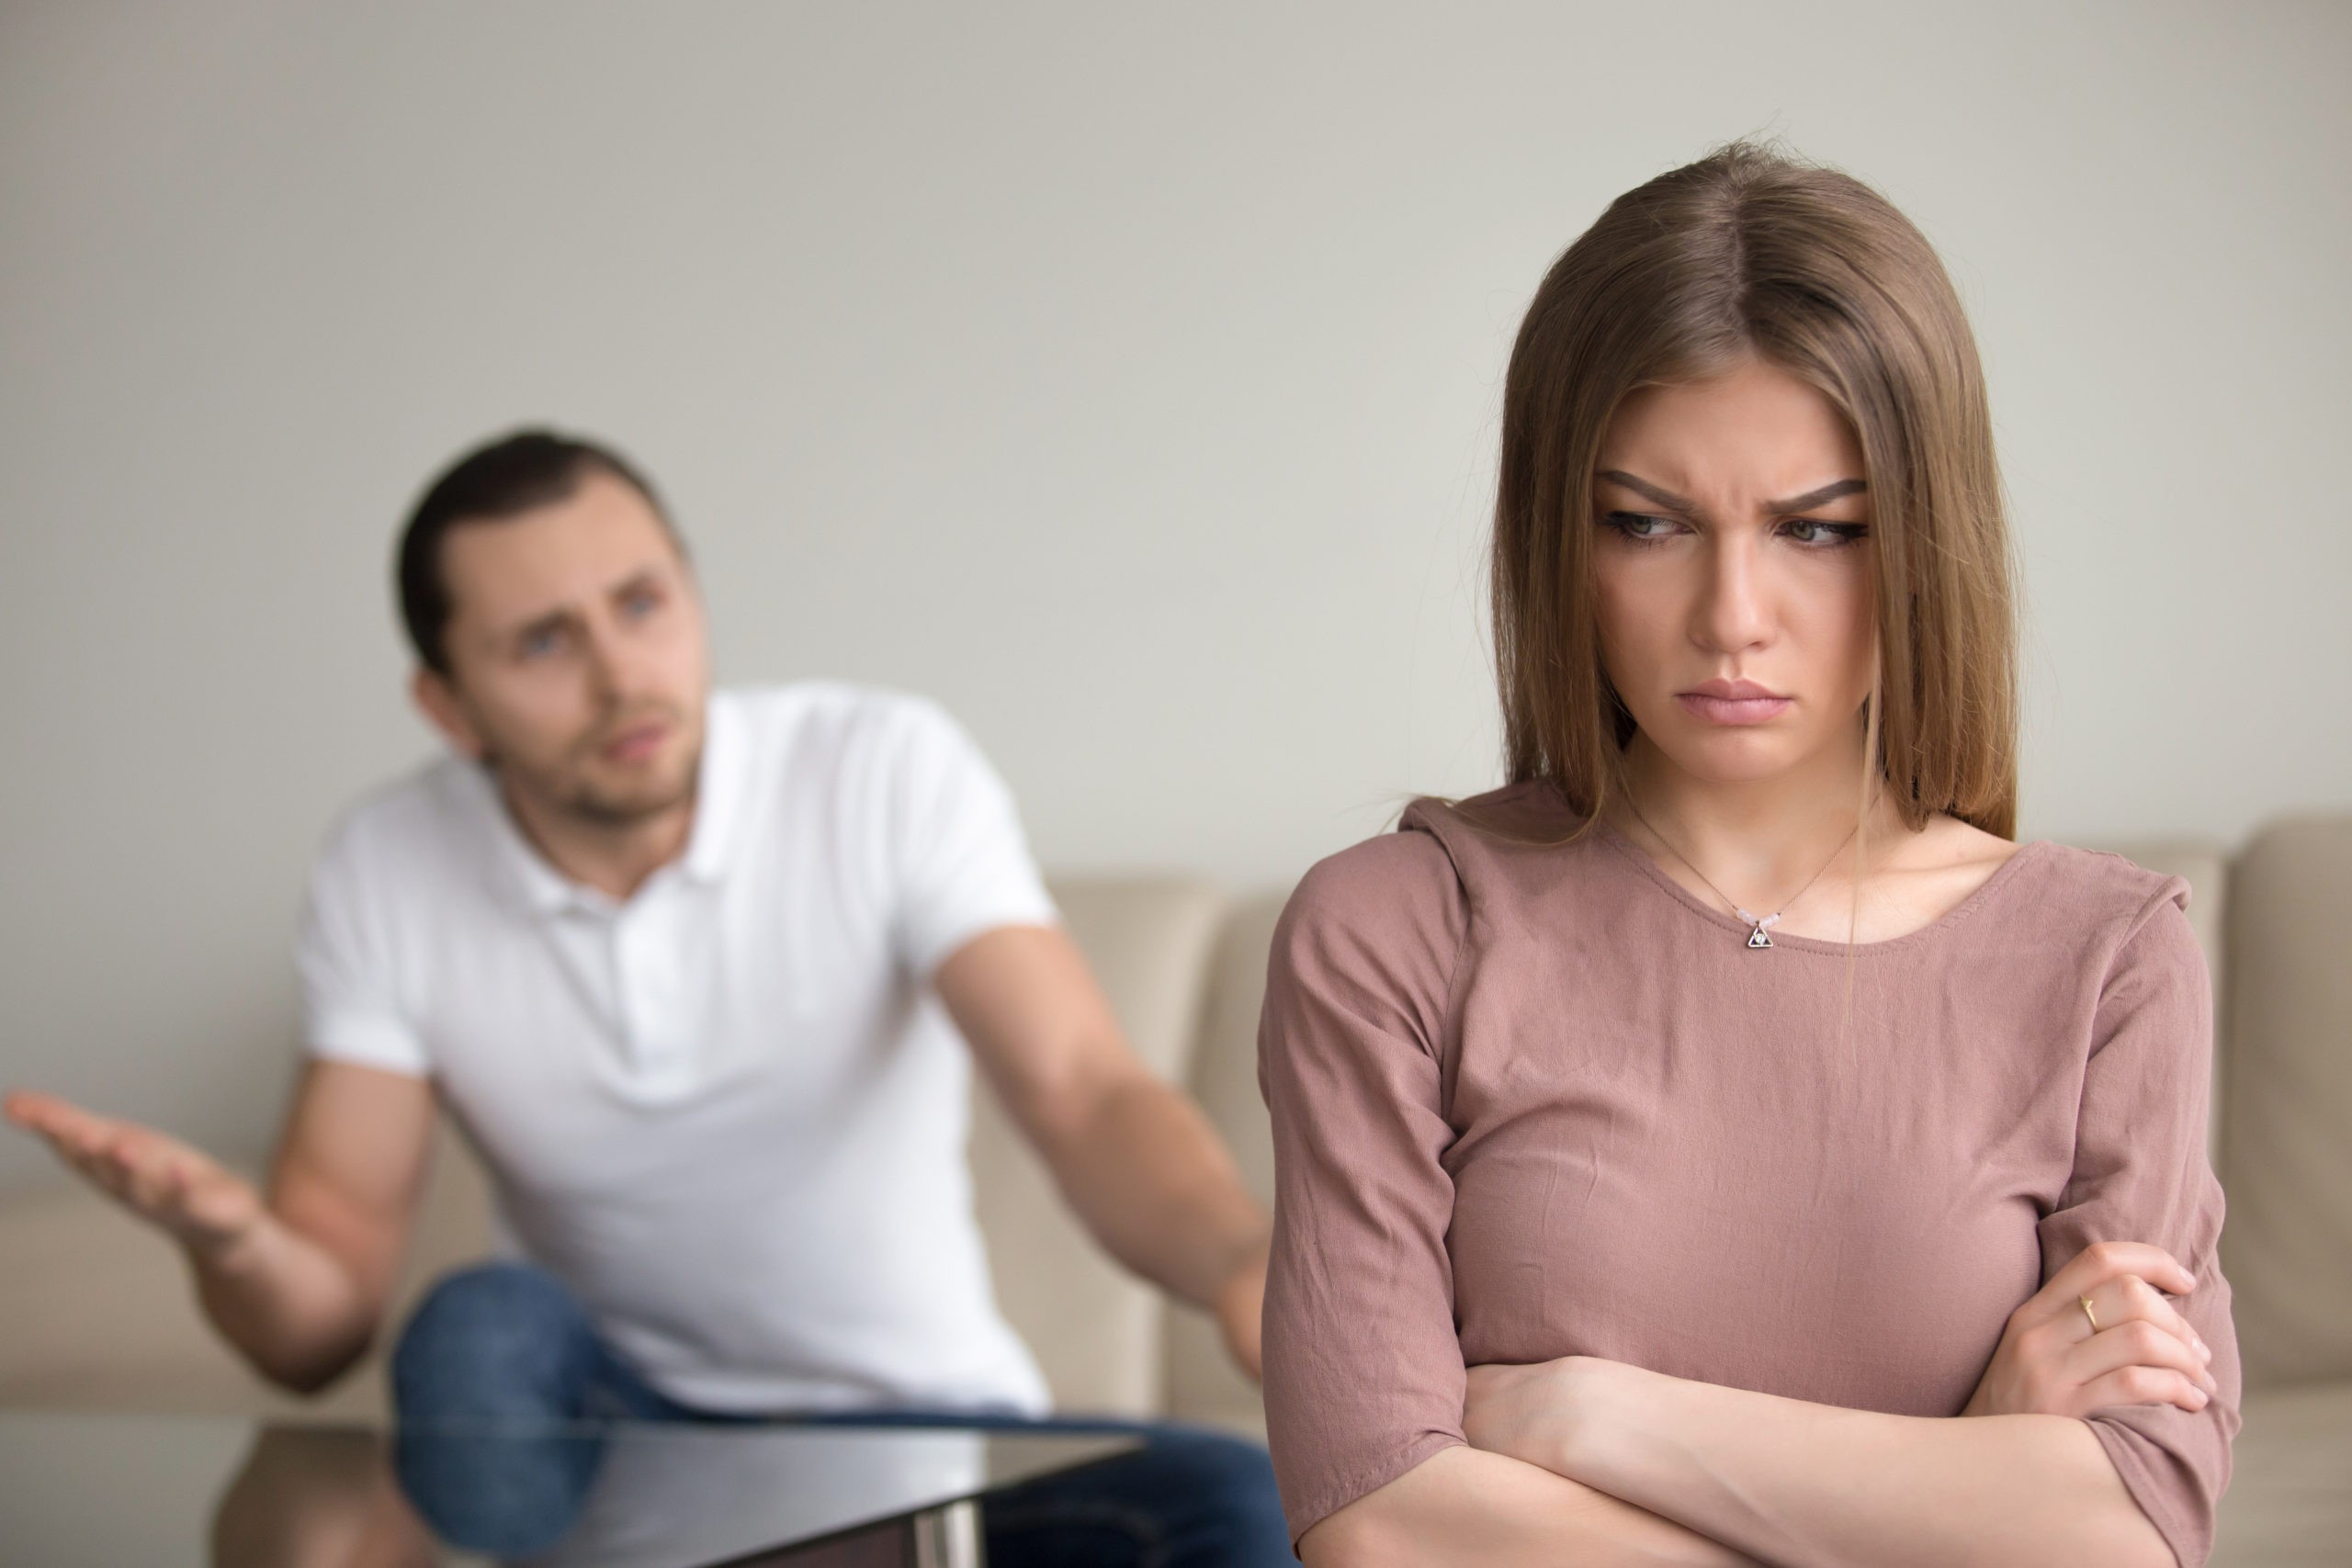 How do you control your anger during conflict?